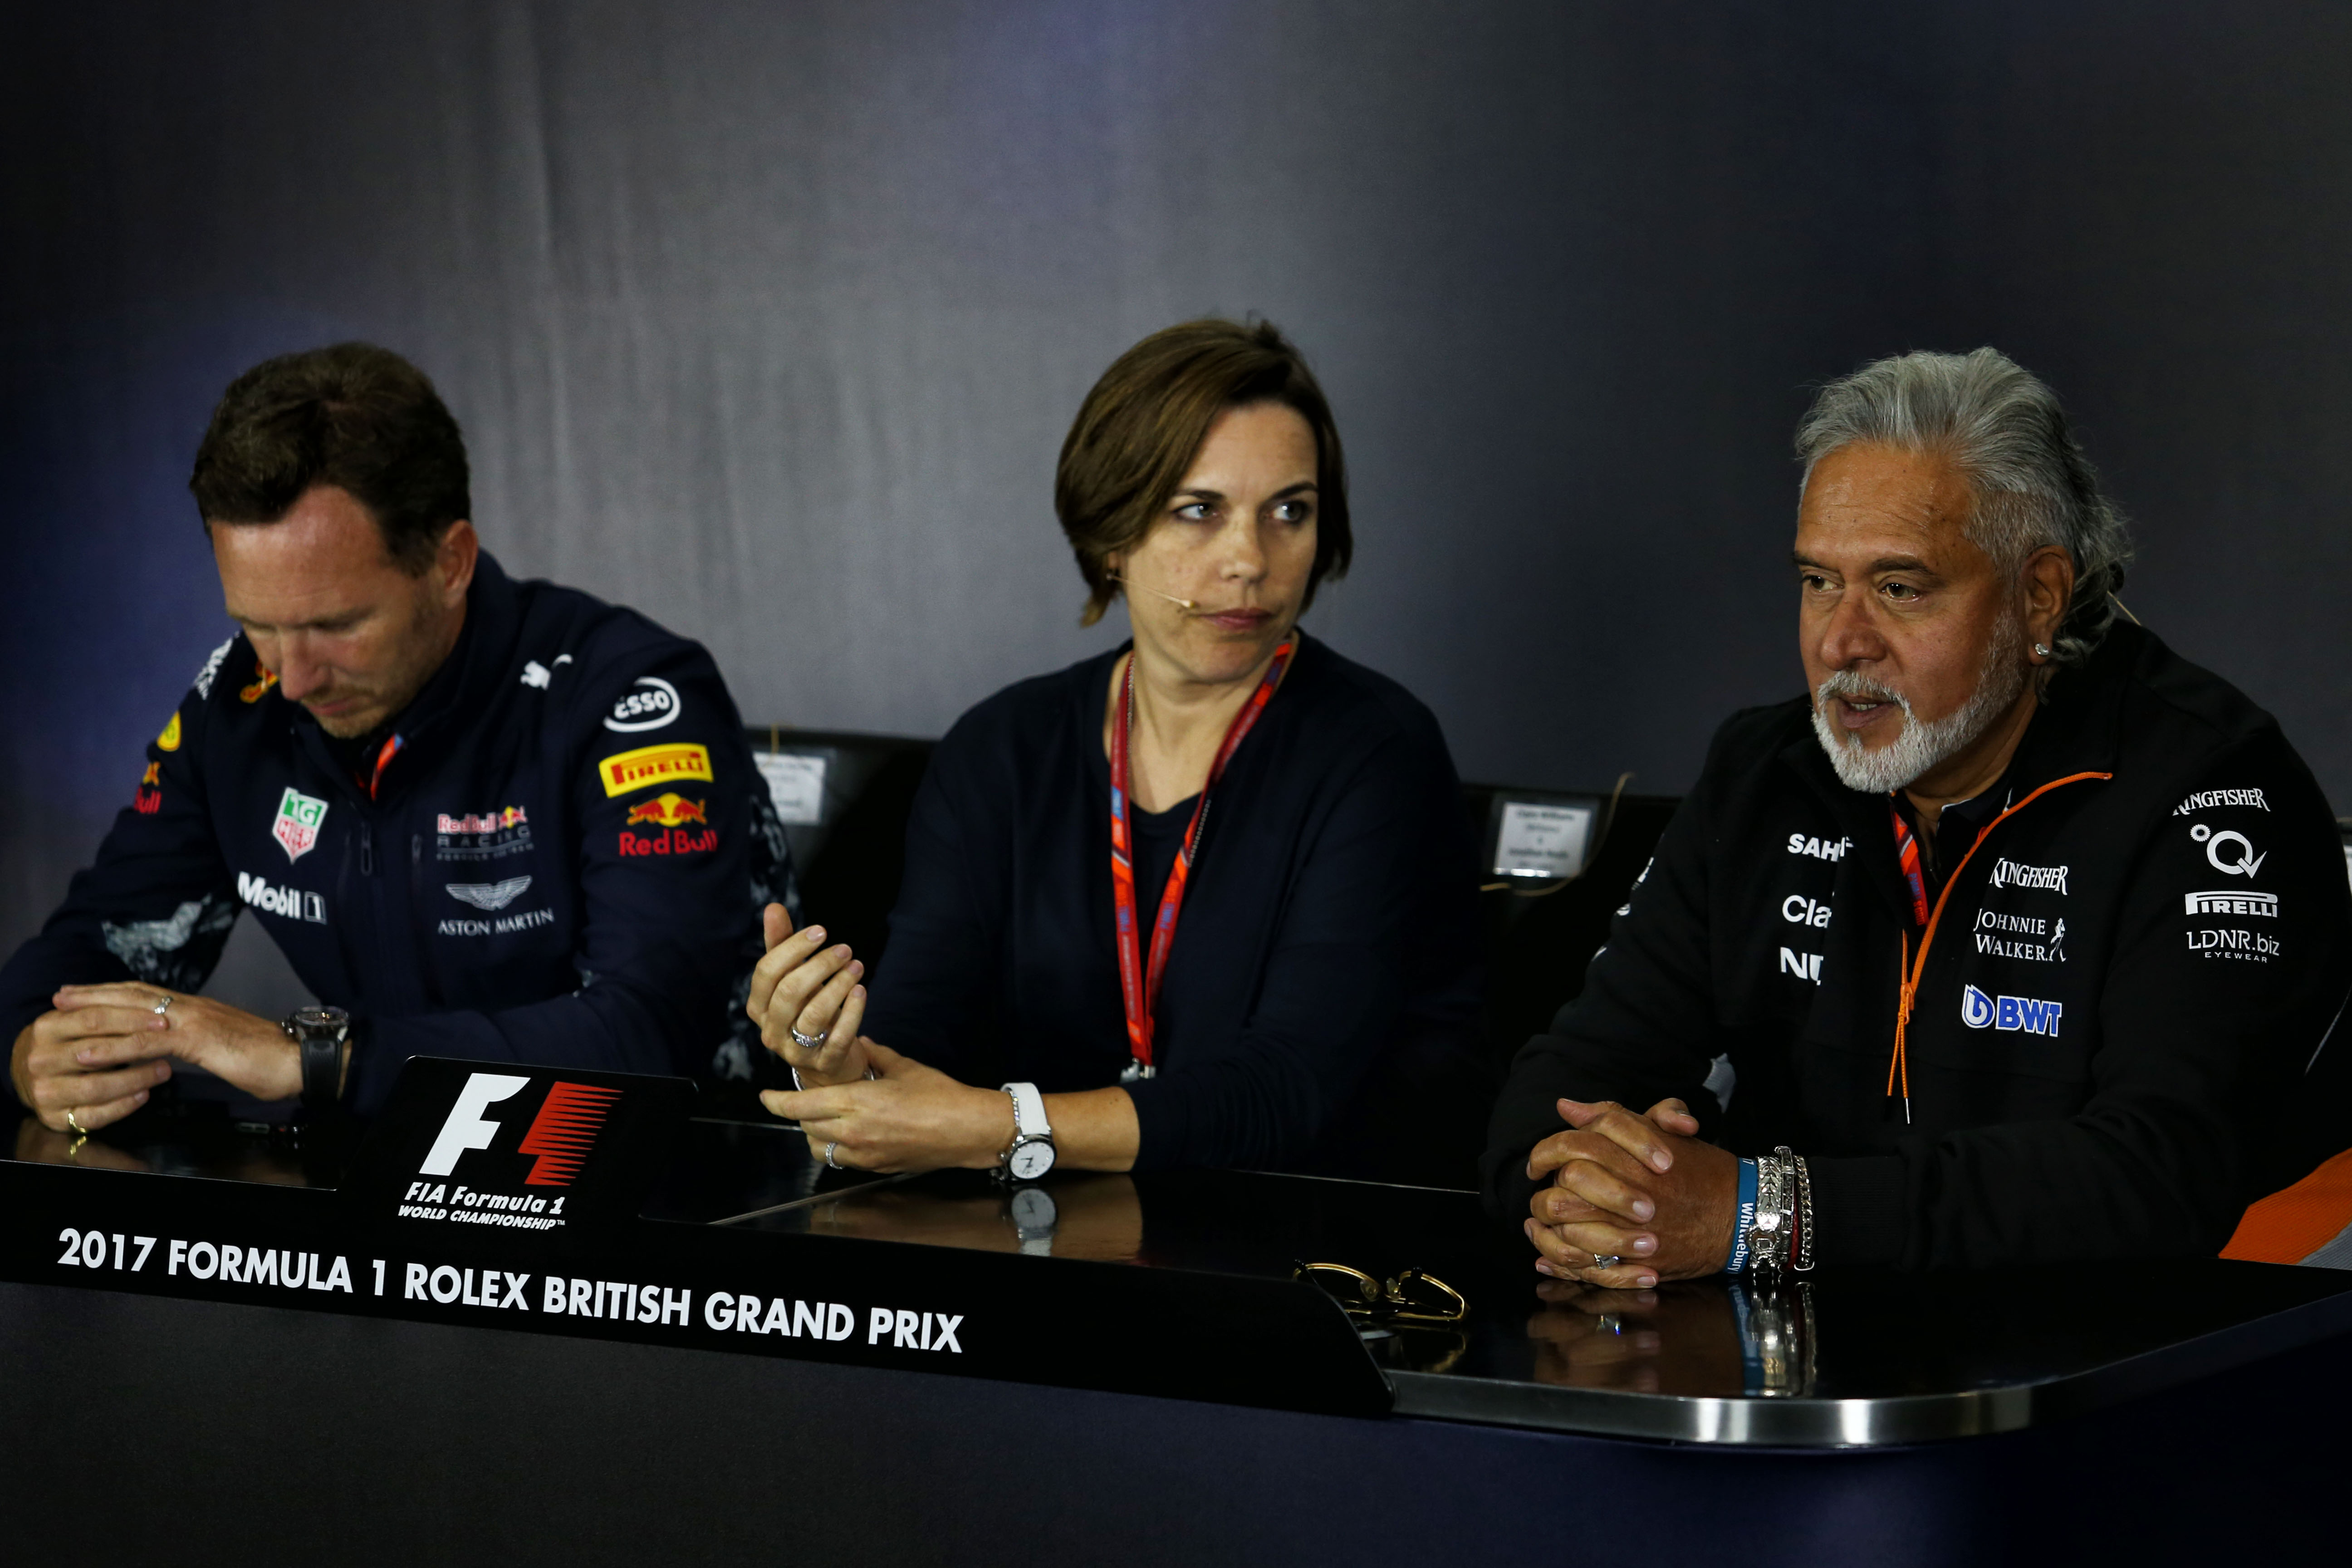 The FIA Press Conference (L to R): Christian Horner (GBR) Red Bull Racing Team Principal; Claire Williams (GBR) Williams Deputy Team Principal; Dr. Vijay Mallya (IND) Sahara Force India F1 Team Owner.
British Grand Prix, Friday 14th July 2017. Silverstone, England.